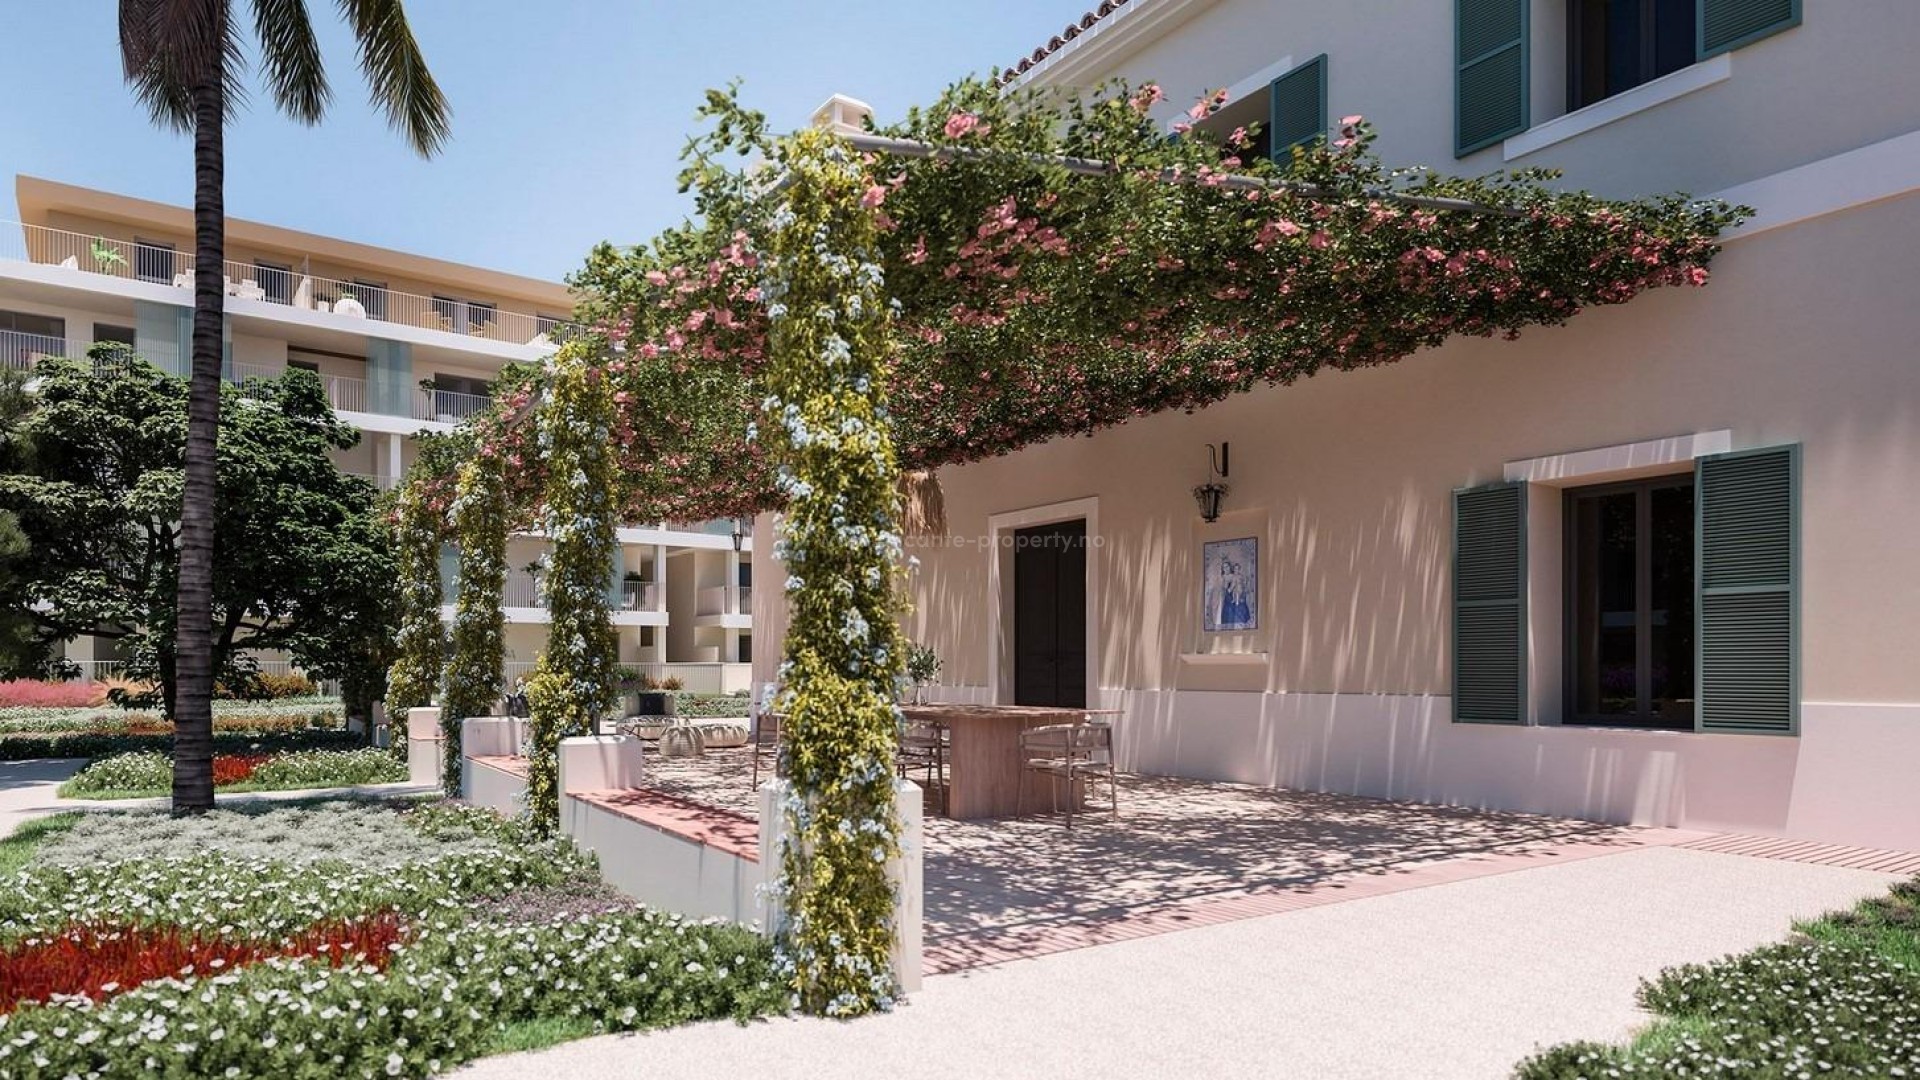 Luxury flats/apartments in Denia with fantastic garden and pool area, 3/4 bedrooms. Just a few meters from the beach. Terrace and gym